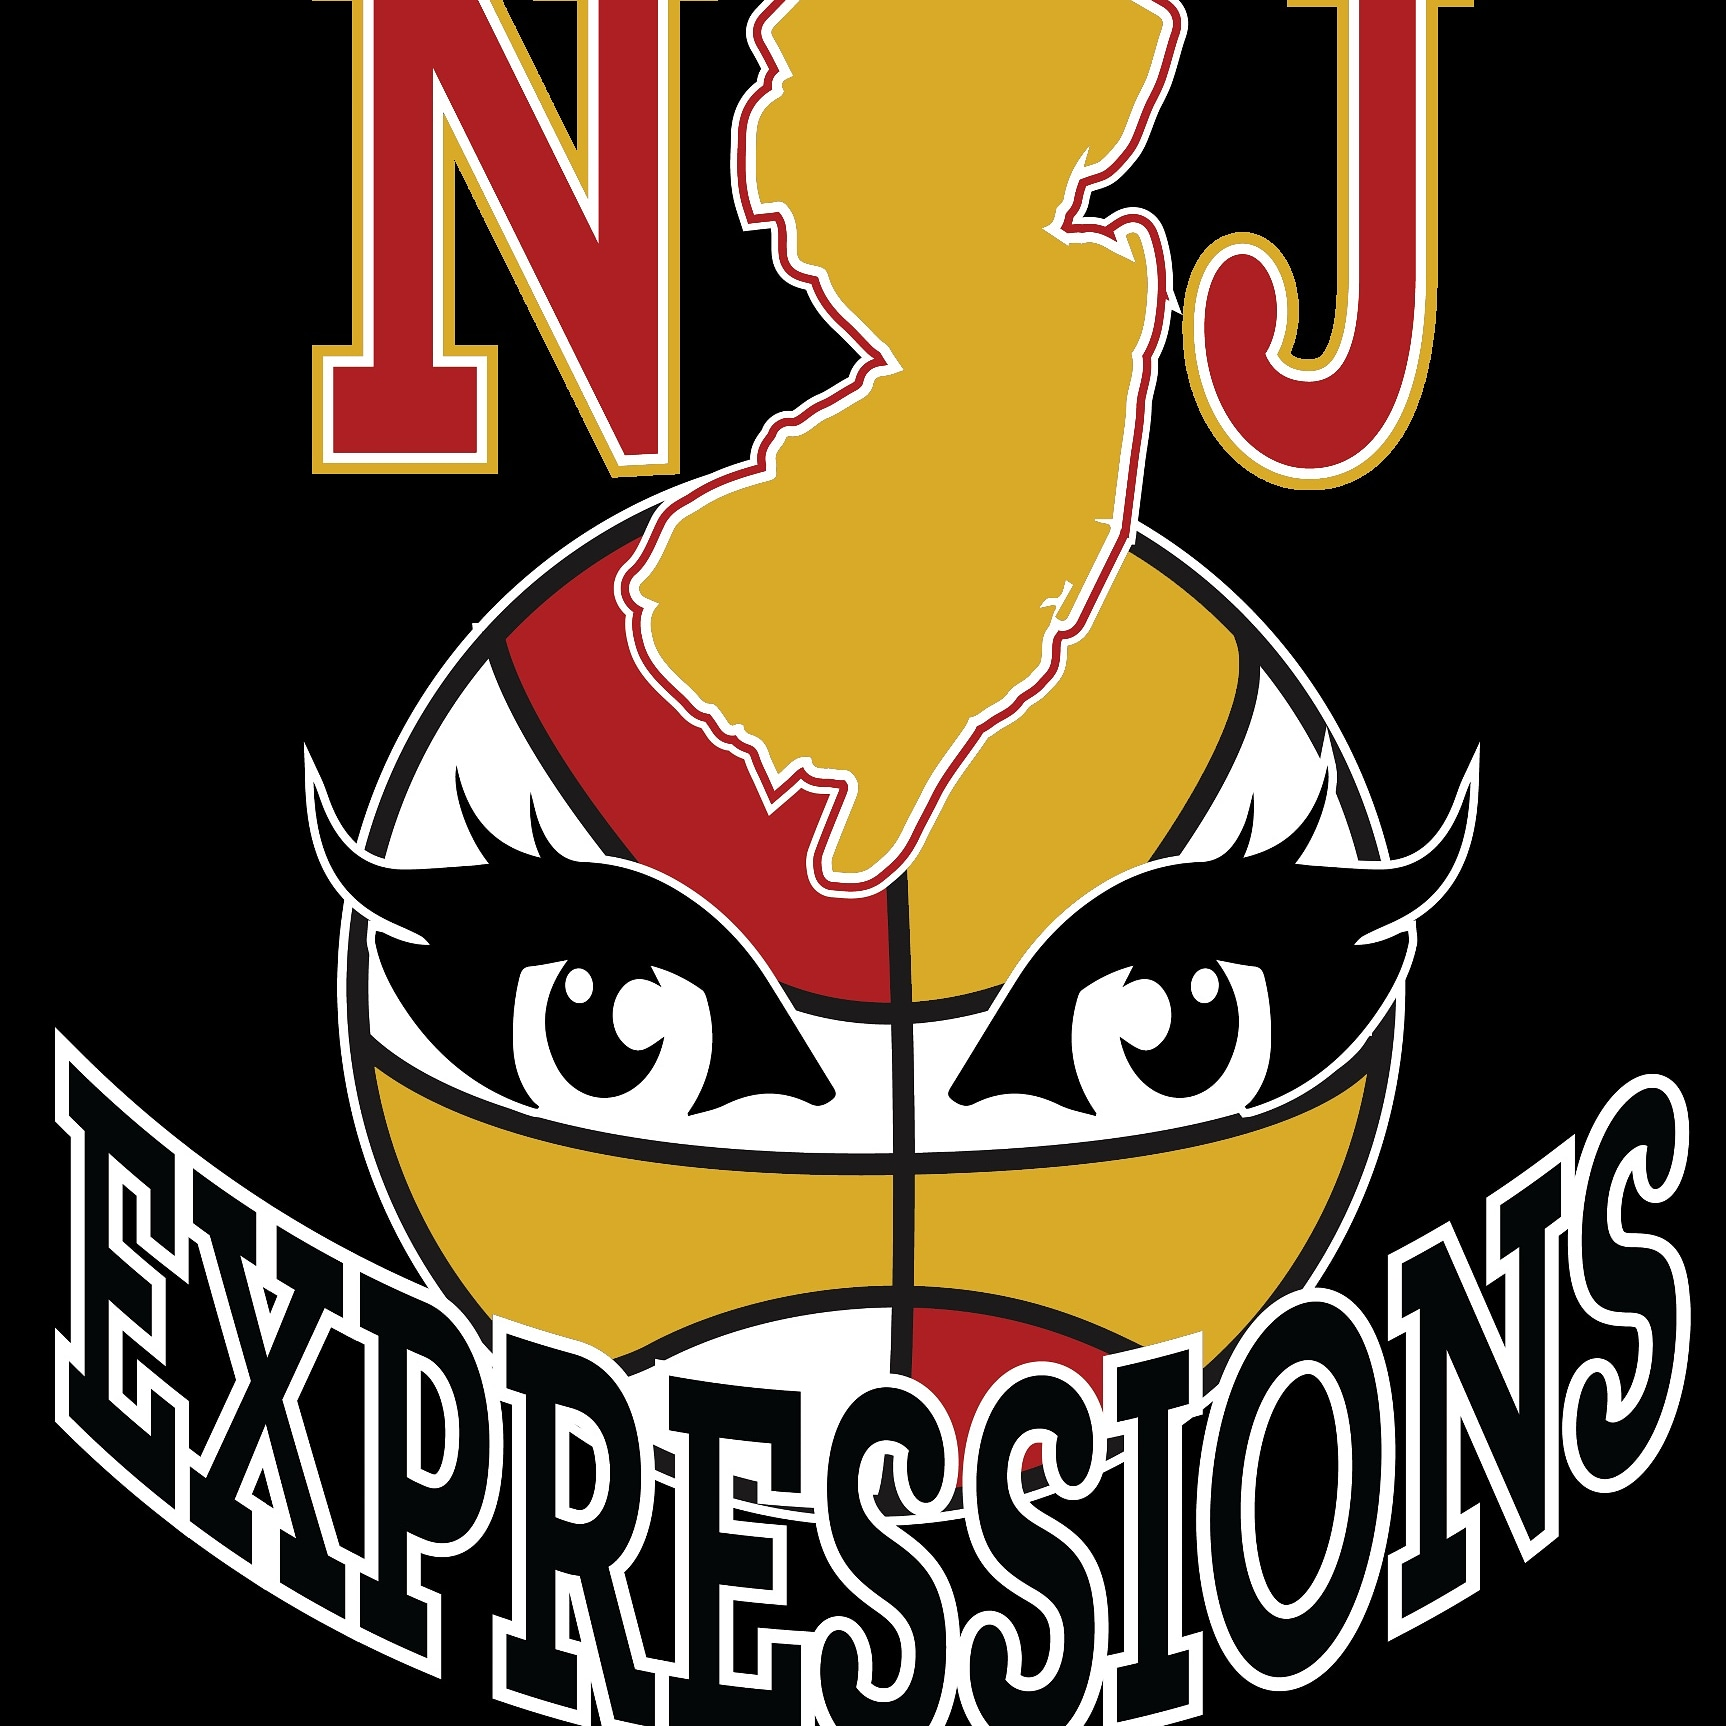 JERSEY EXPRESSIONS